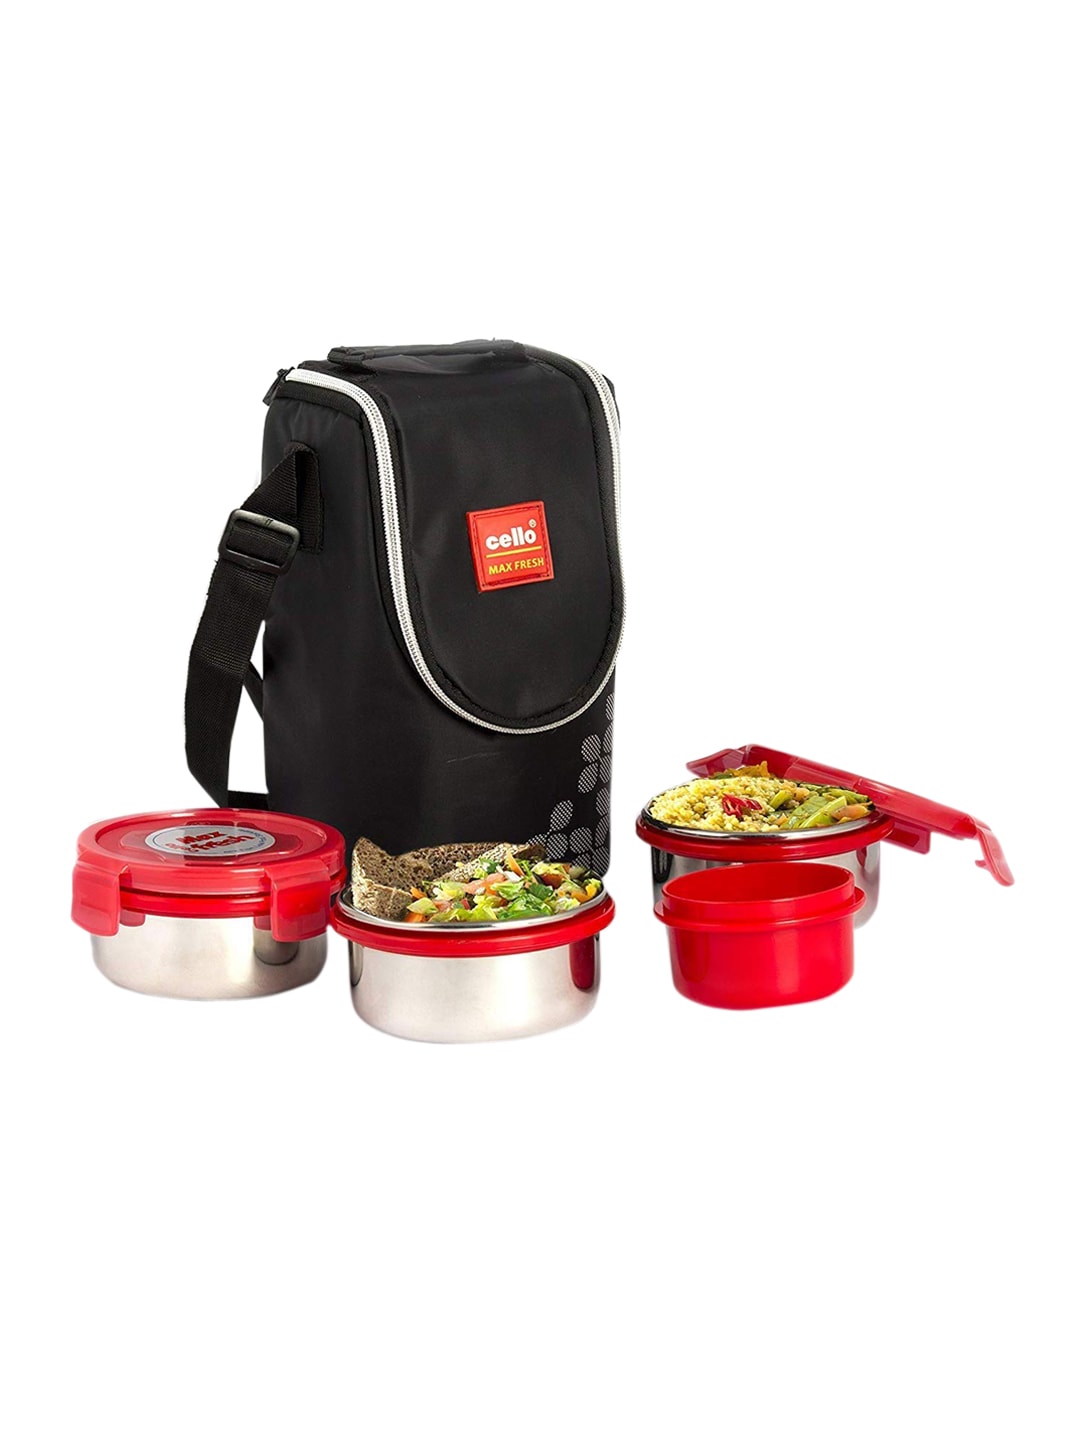 Cello 3 Pieces Red & Silver-Toned Solid Stainless Steel Lunch Box With Bag Price in India